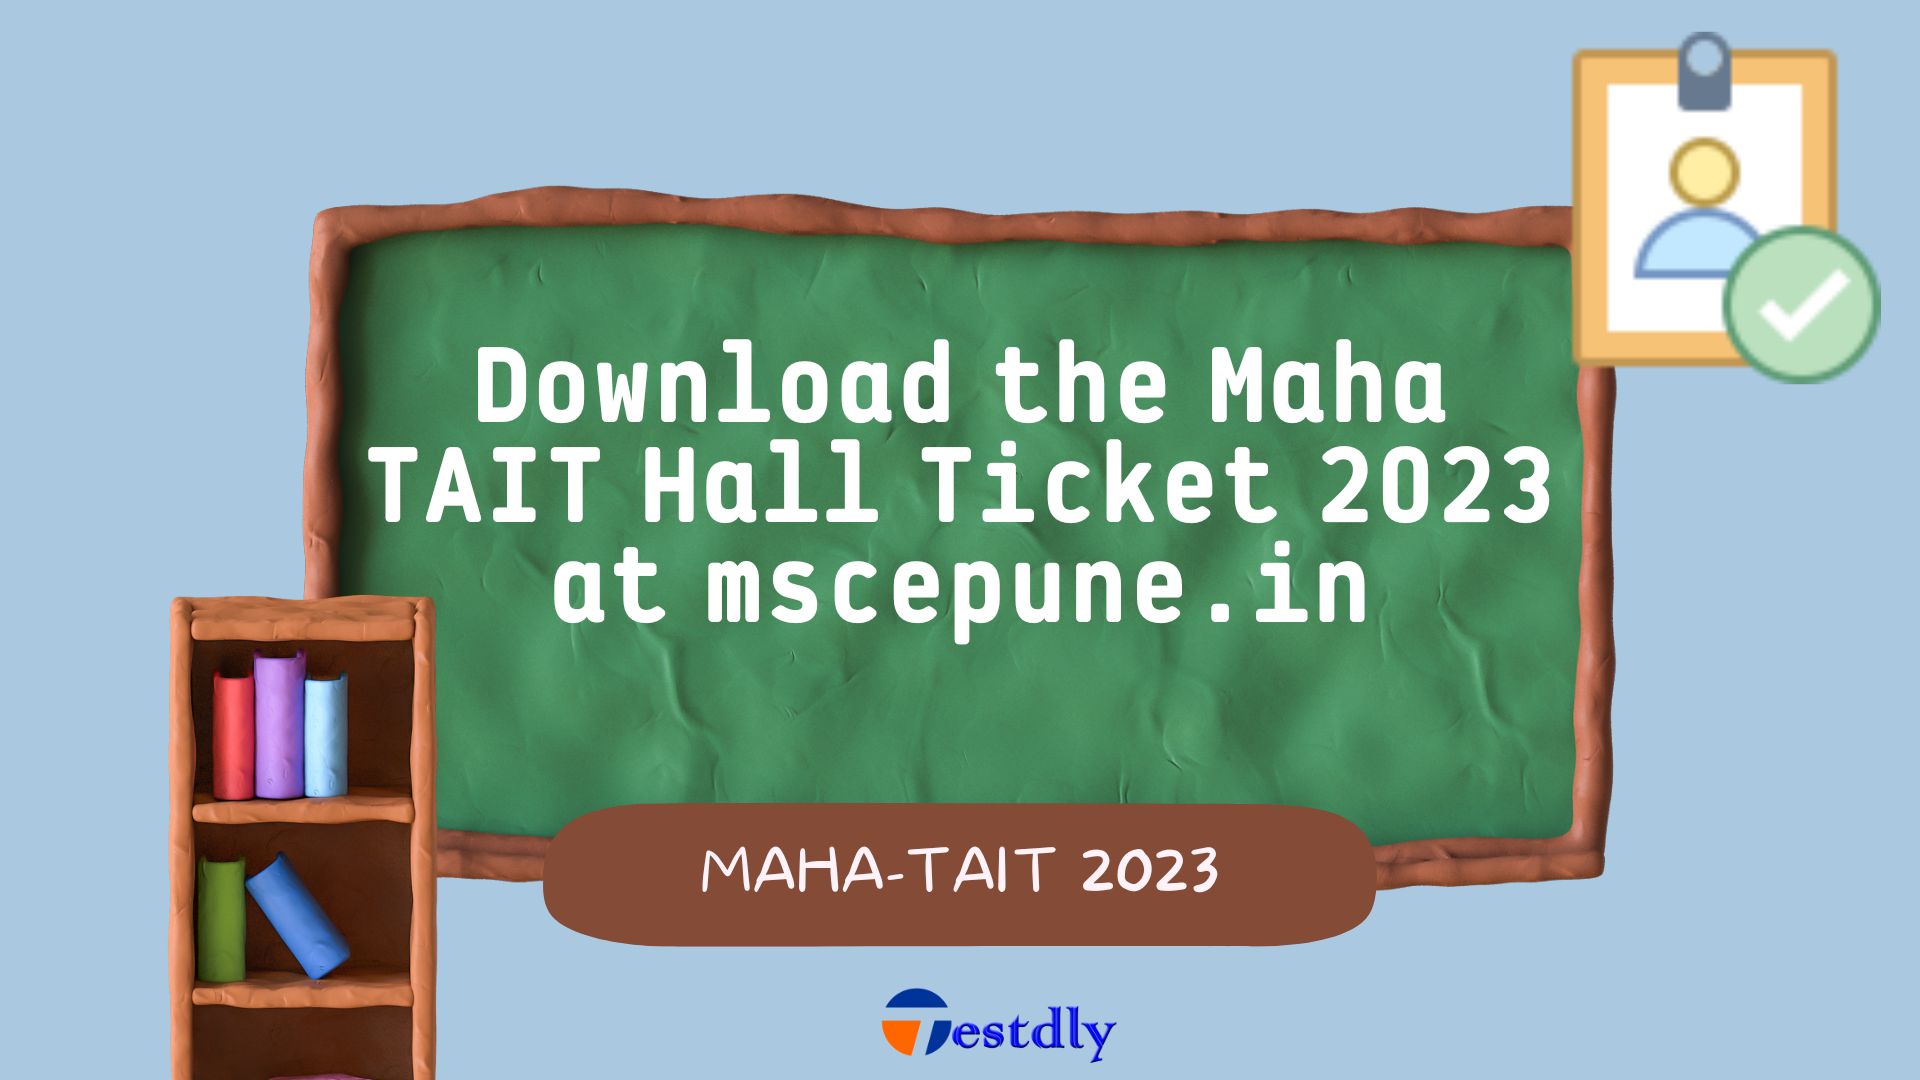 Download the Maha TAIT Hall Ticket 2023 at mscepune.in.